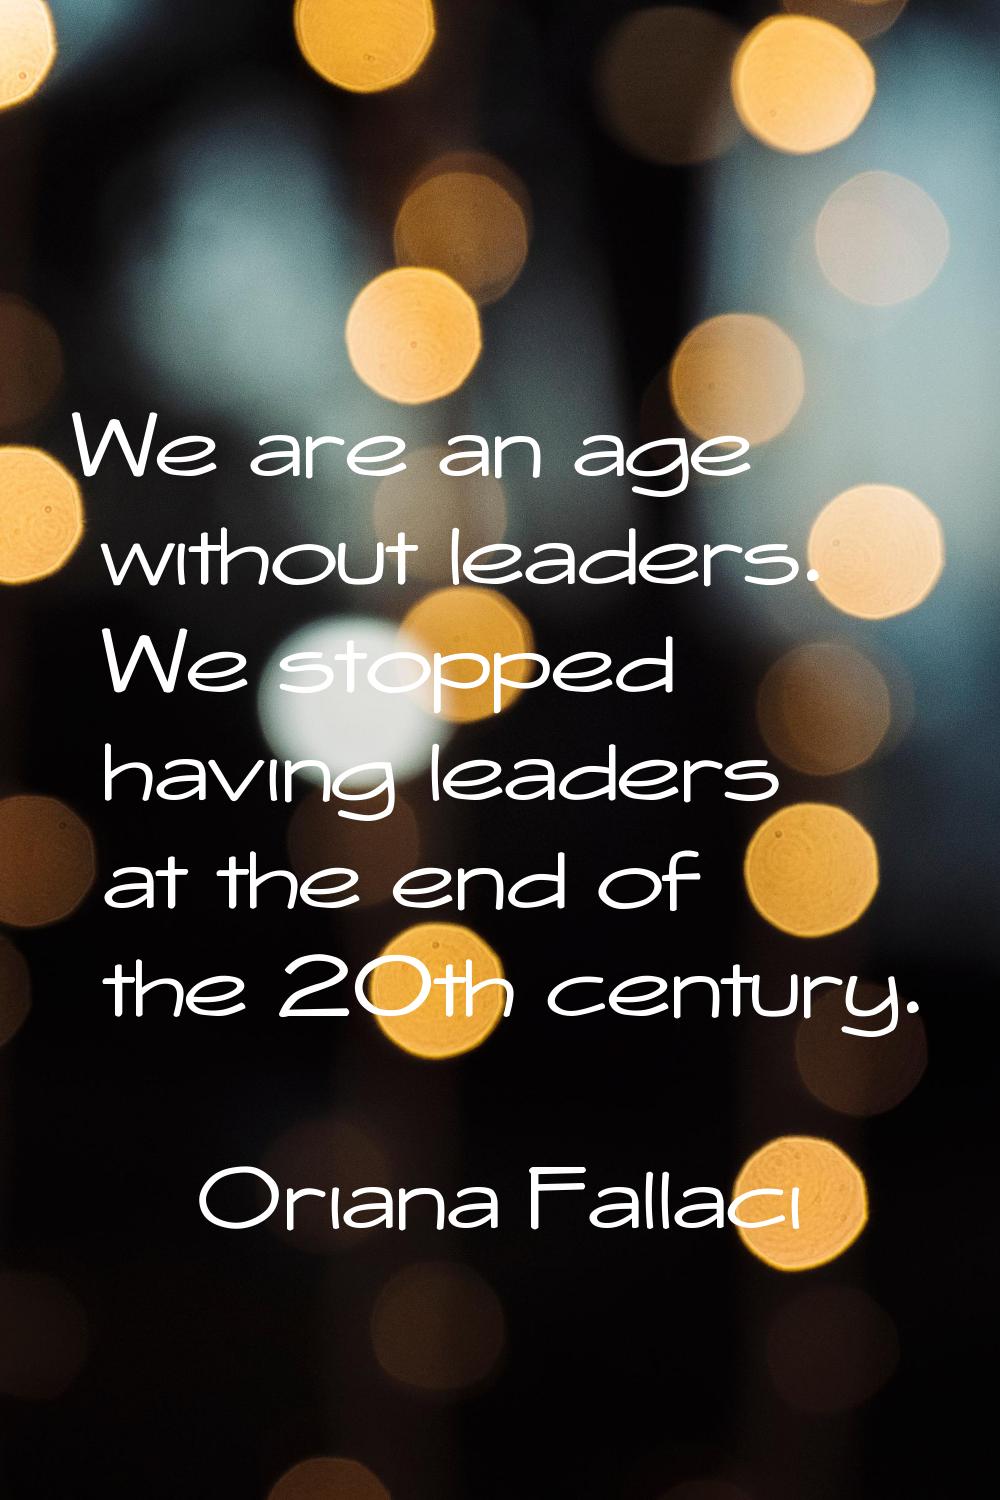 We are an age without leaders. We stopped having leaders at the end of the 20th century.